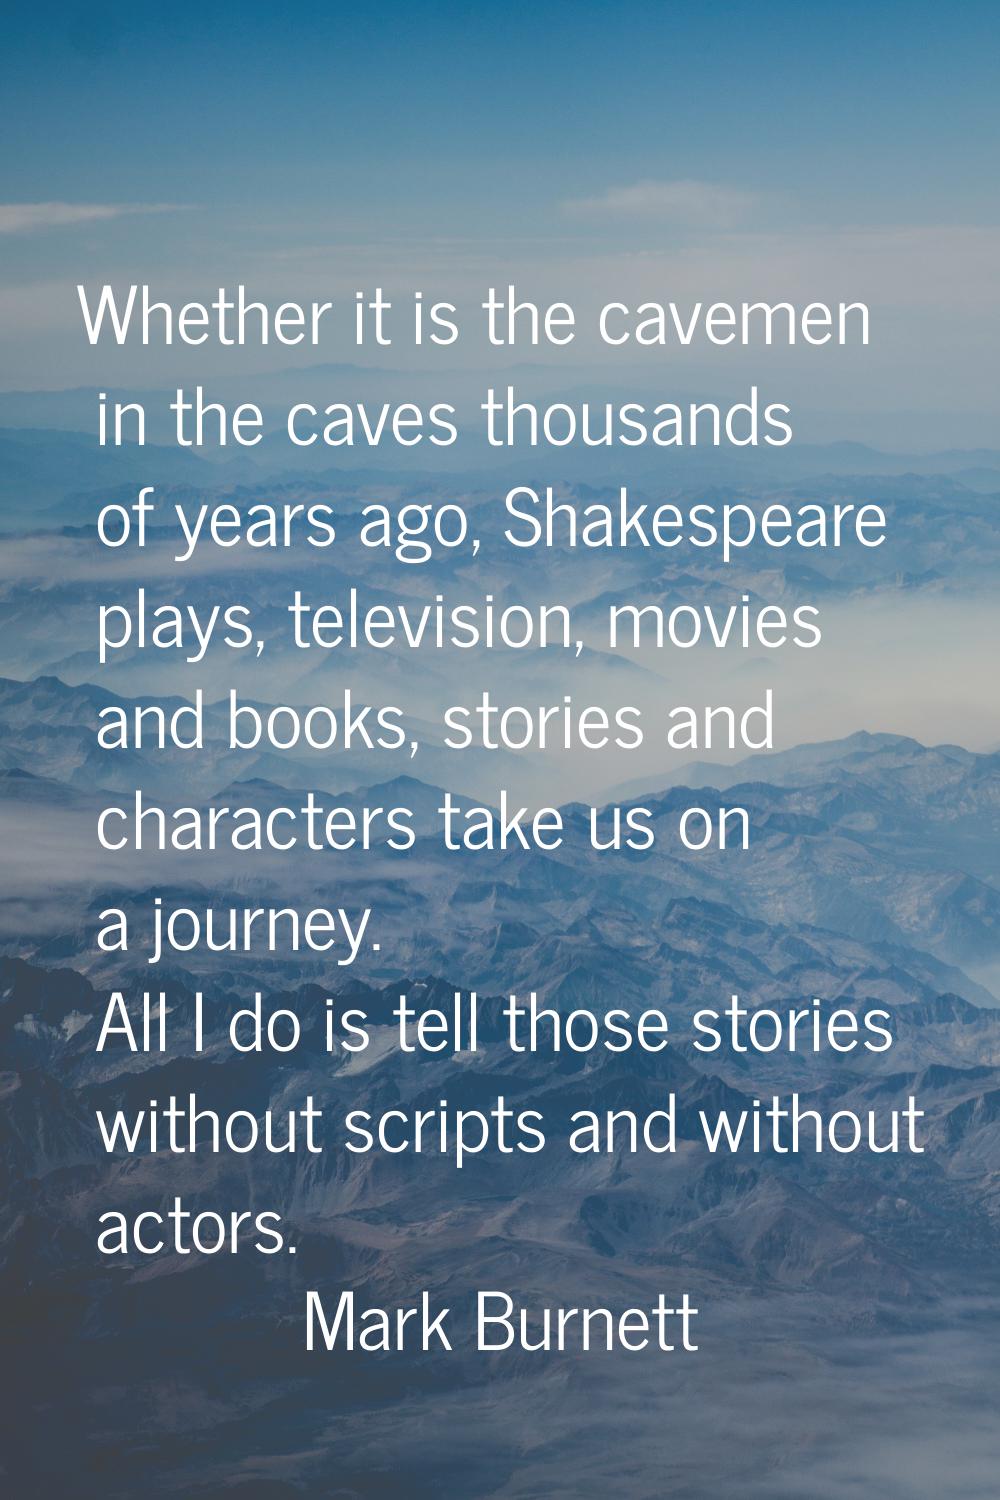 Whether it is the cavemen in the caves thousands of years ago, Shakespeare plays, television, movie